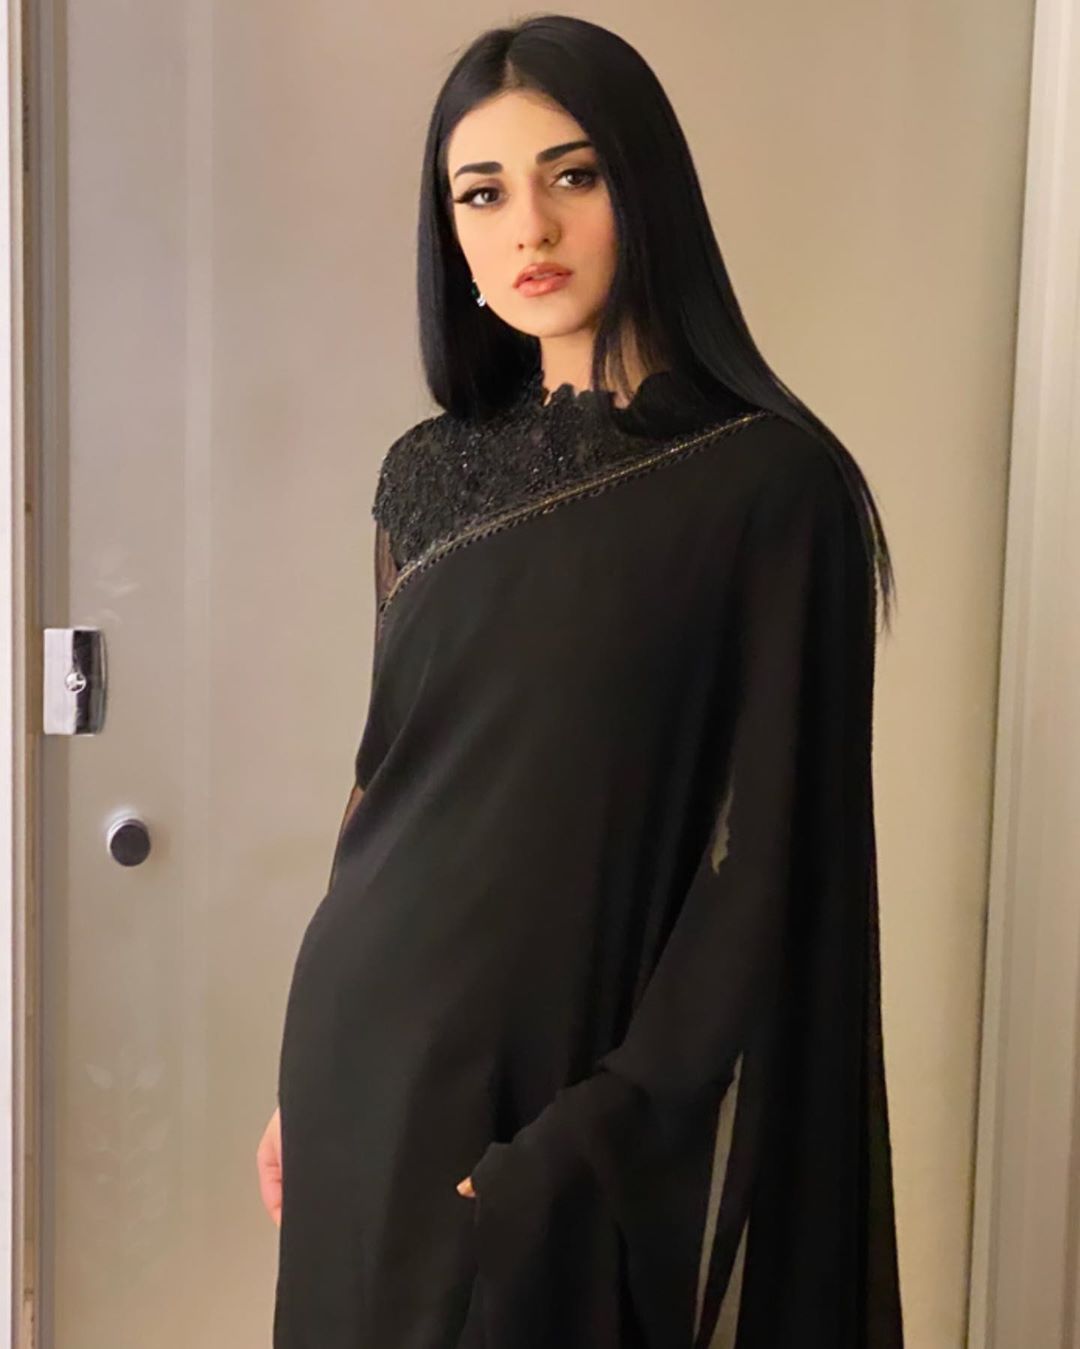 Beautiful Sarah Khan Latest Pictures in Saree from Her Upcoming Drama